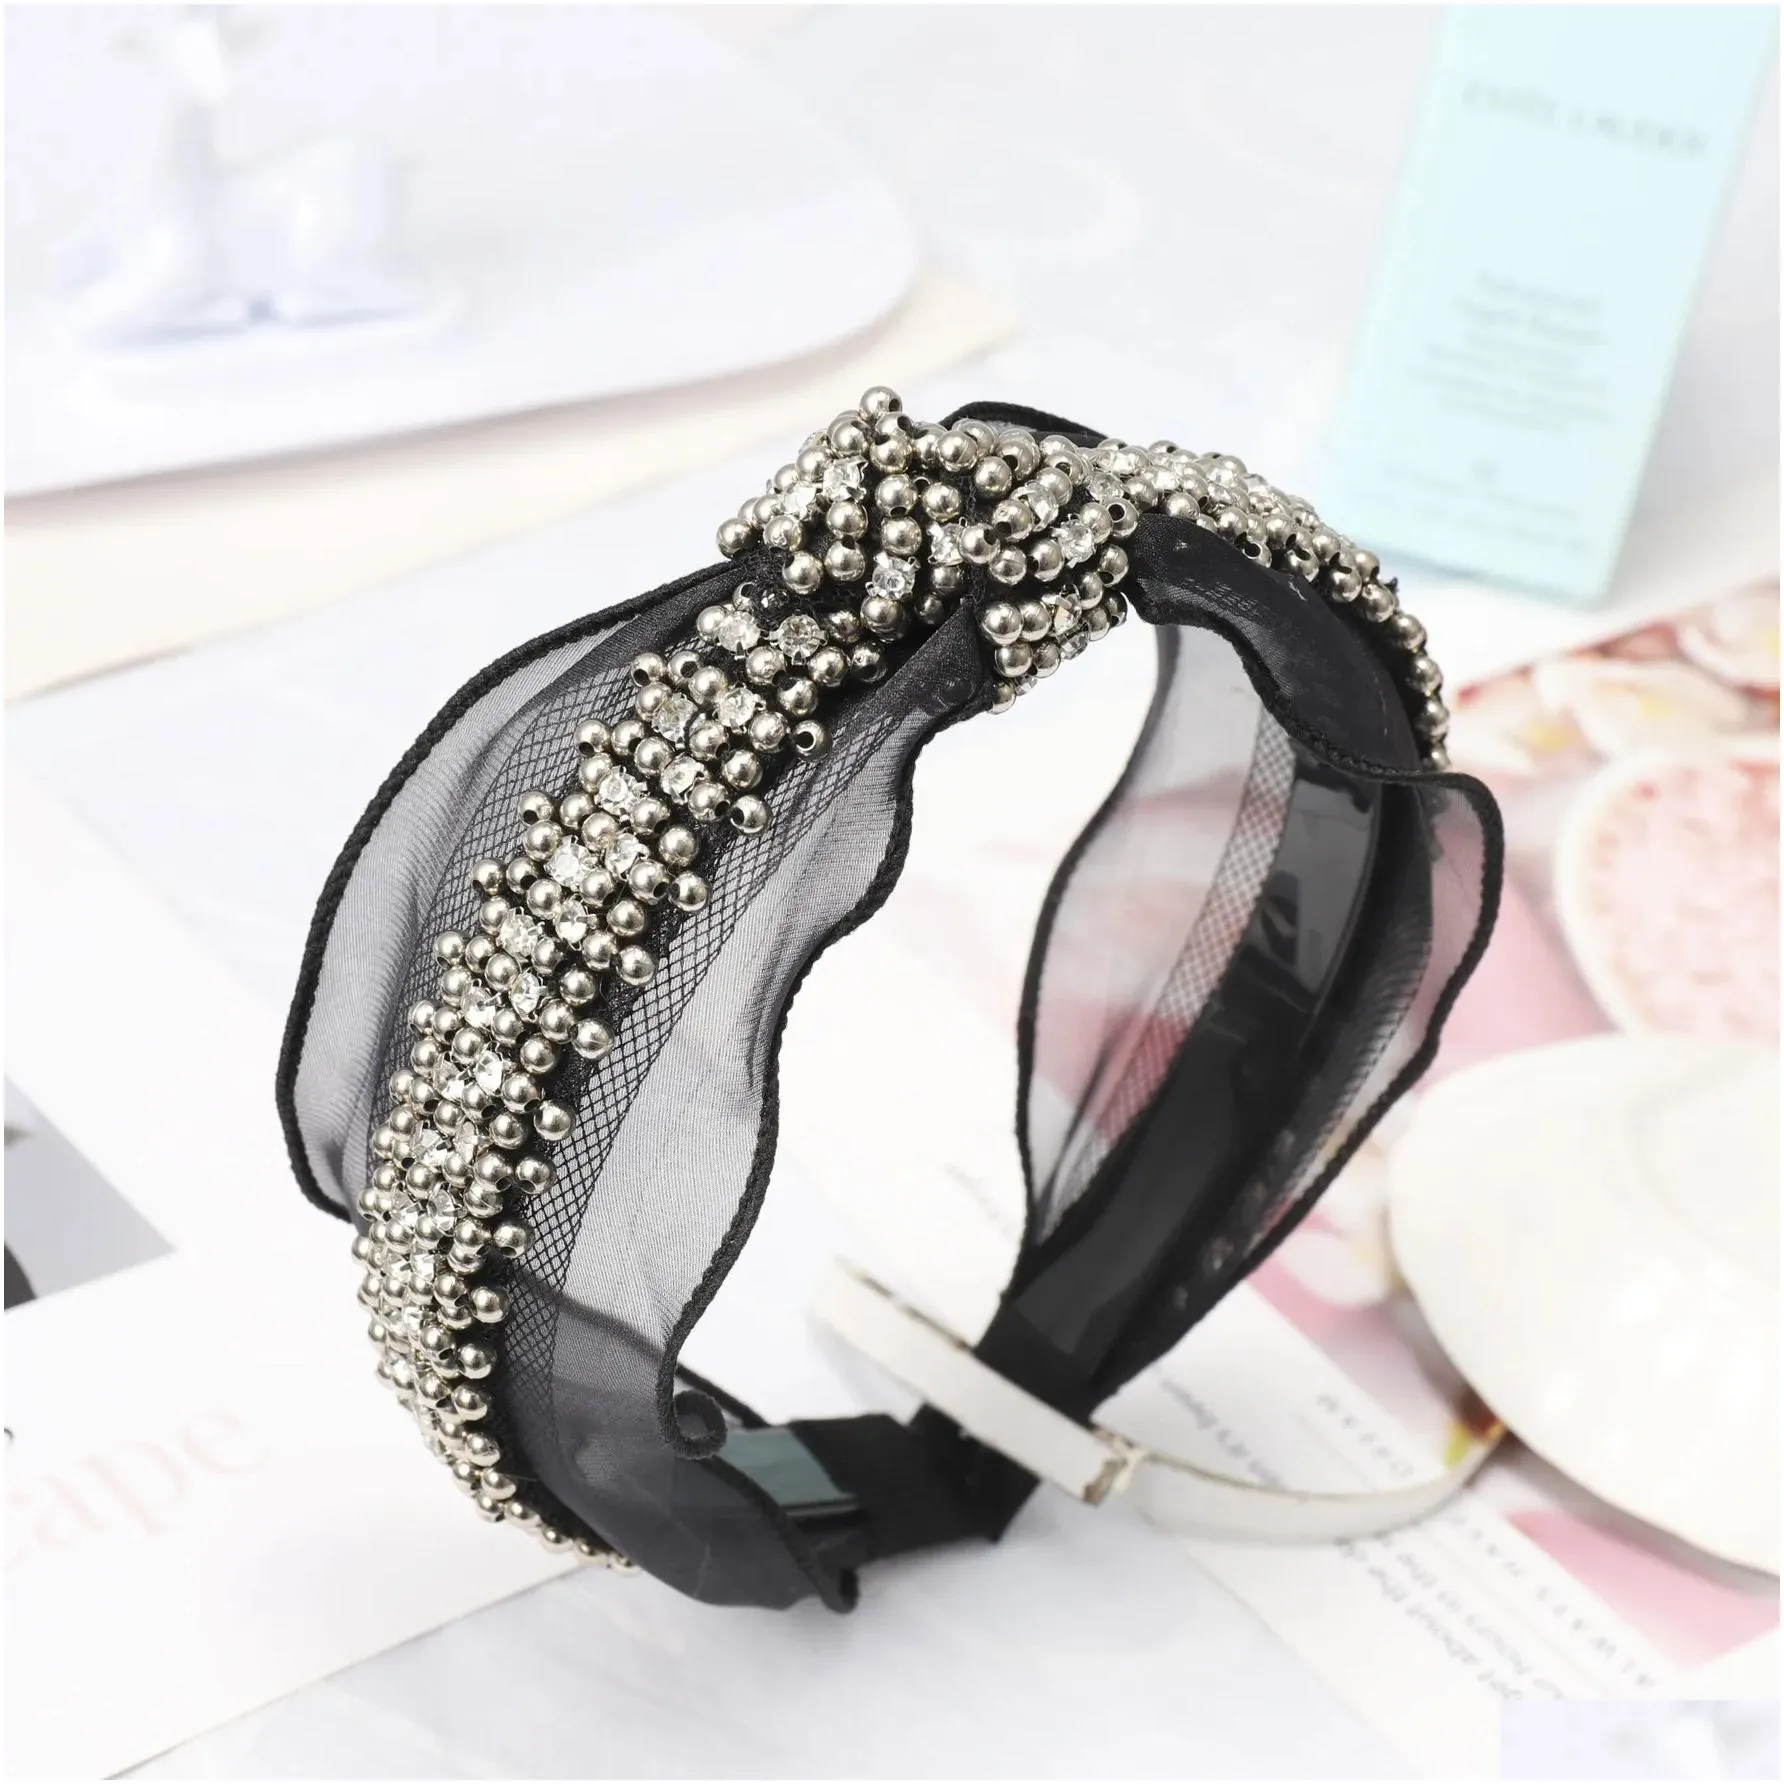 Lace Headband Diamond Pearl Rhinestone Hair Accessories Black Butterfly Boutique Bow Hair Bands For Women Knot Haar Accessoires1538105